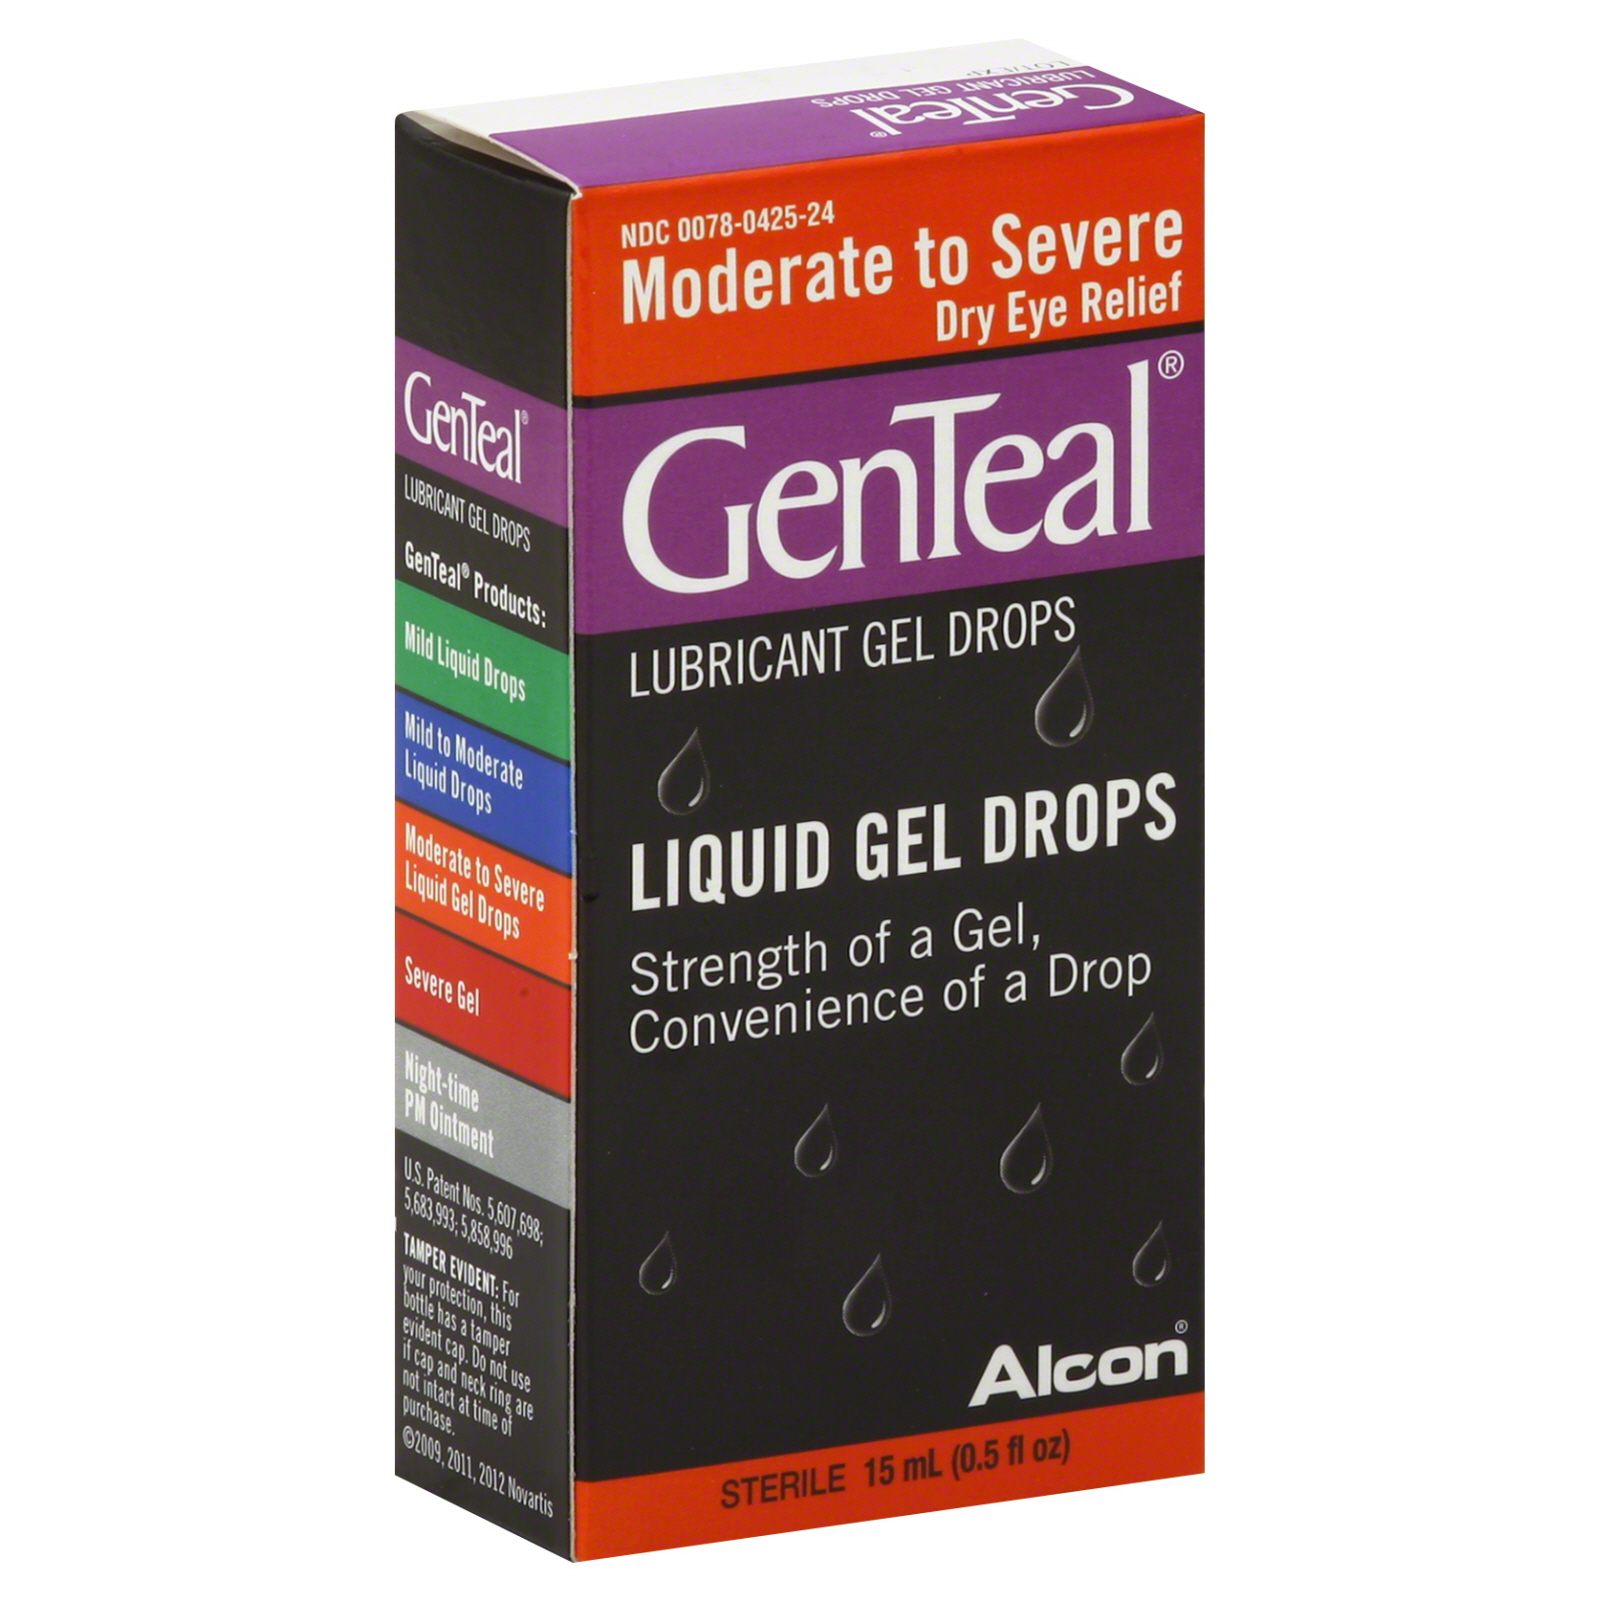 GenTeal Eye Drops, Lubricant, Moderate to Severe Dry Eye Relief, 0.5 fl oz (15 ml)